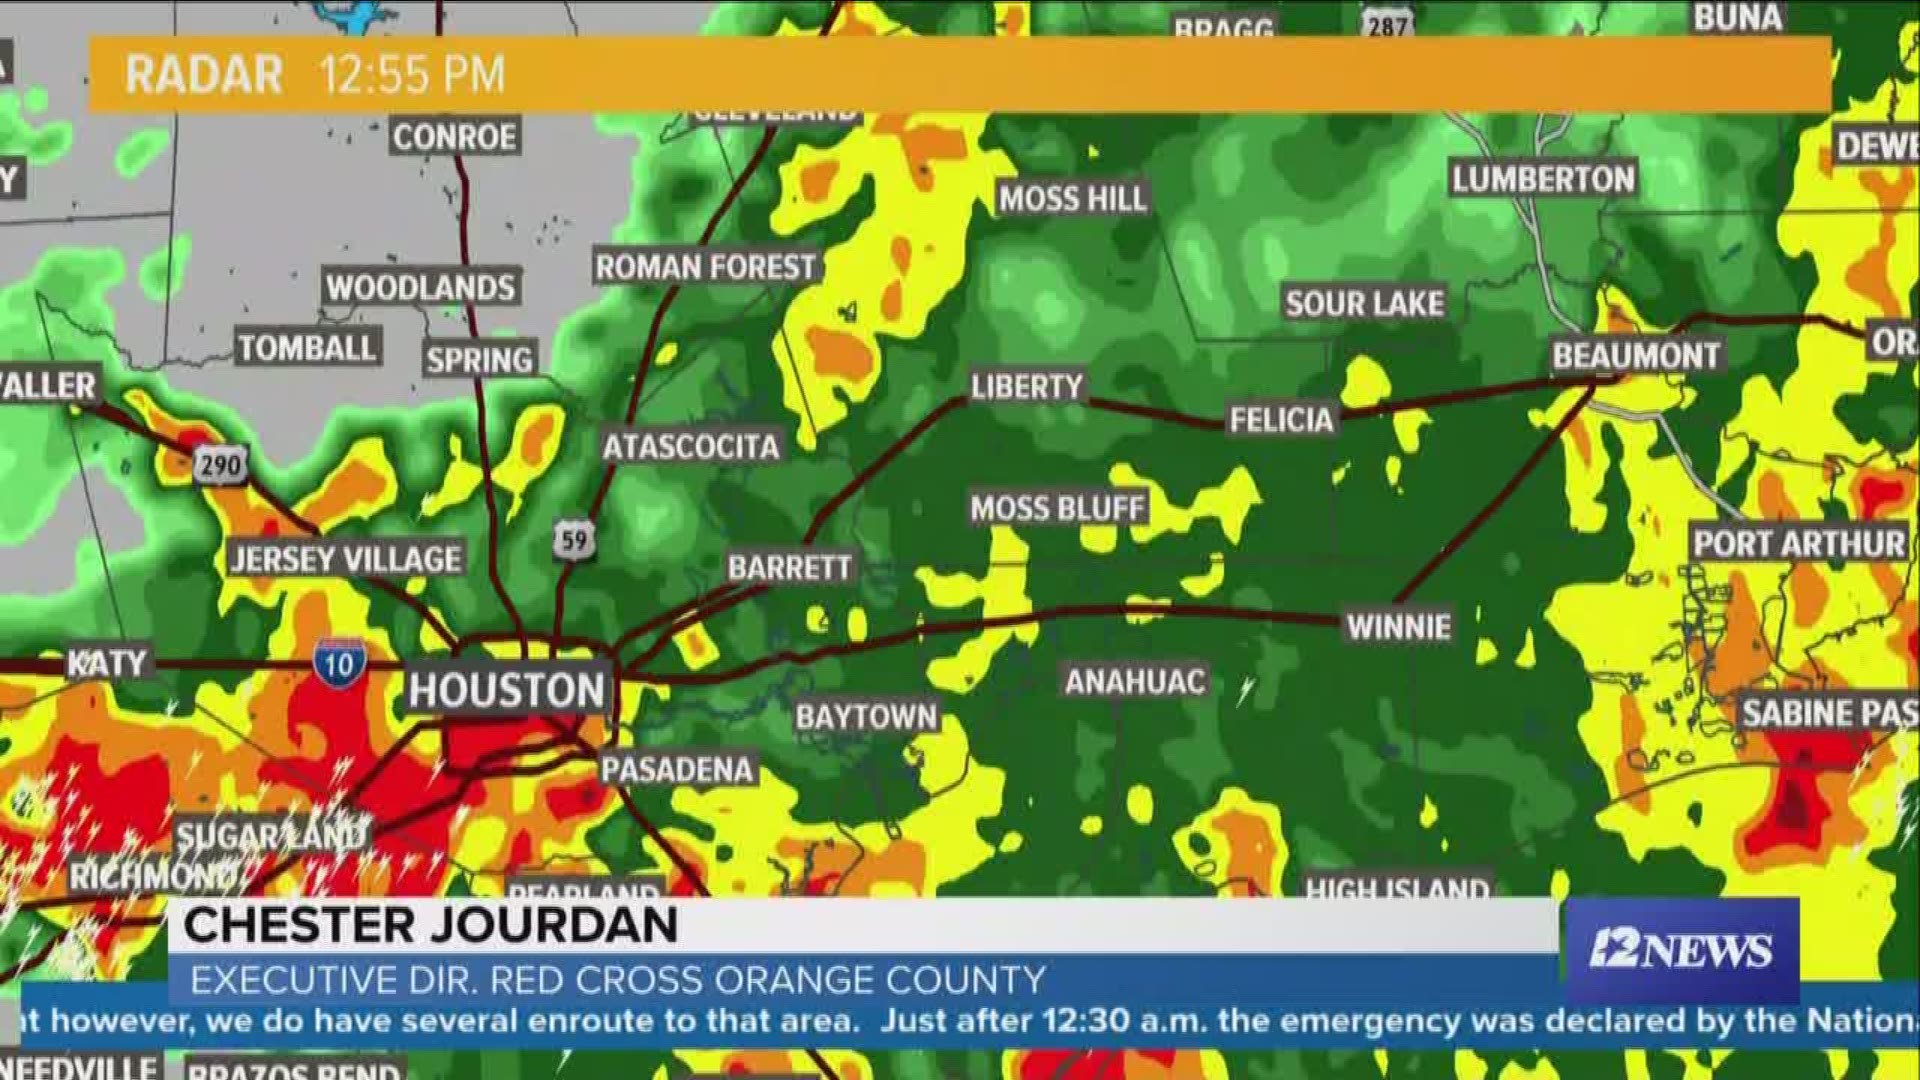 Good news, southeast Texans: KBMT and KHOU weather teams say rain bands appear to be moving southeast toward the Gulf of Mexico, away from the Golden Triangle.